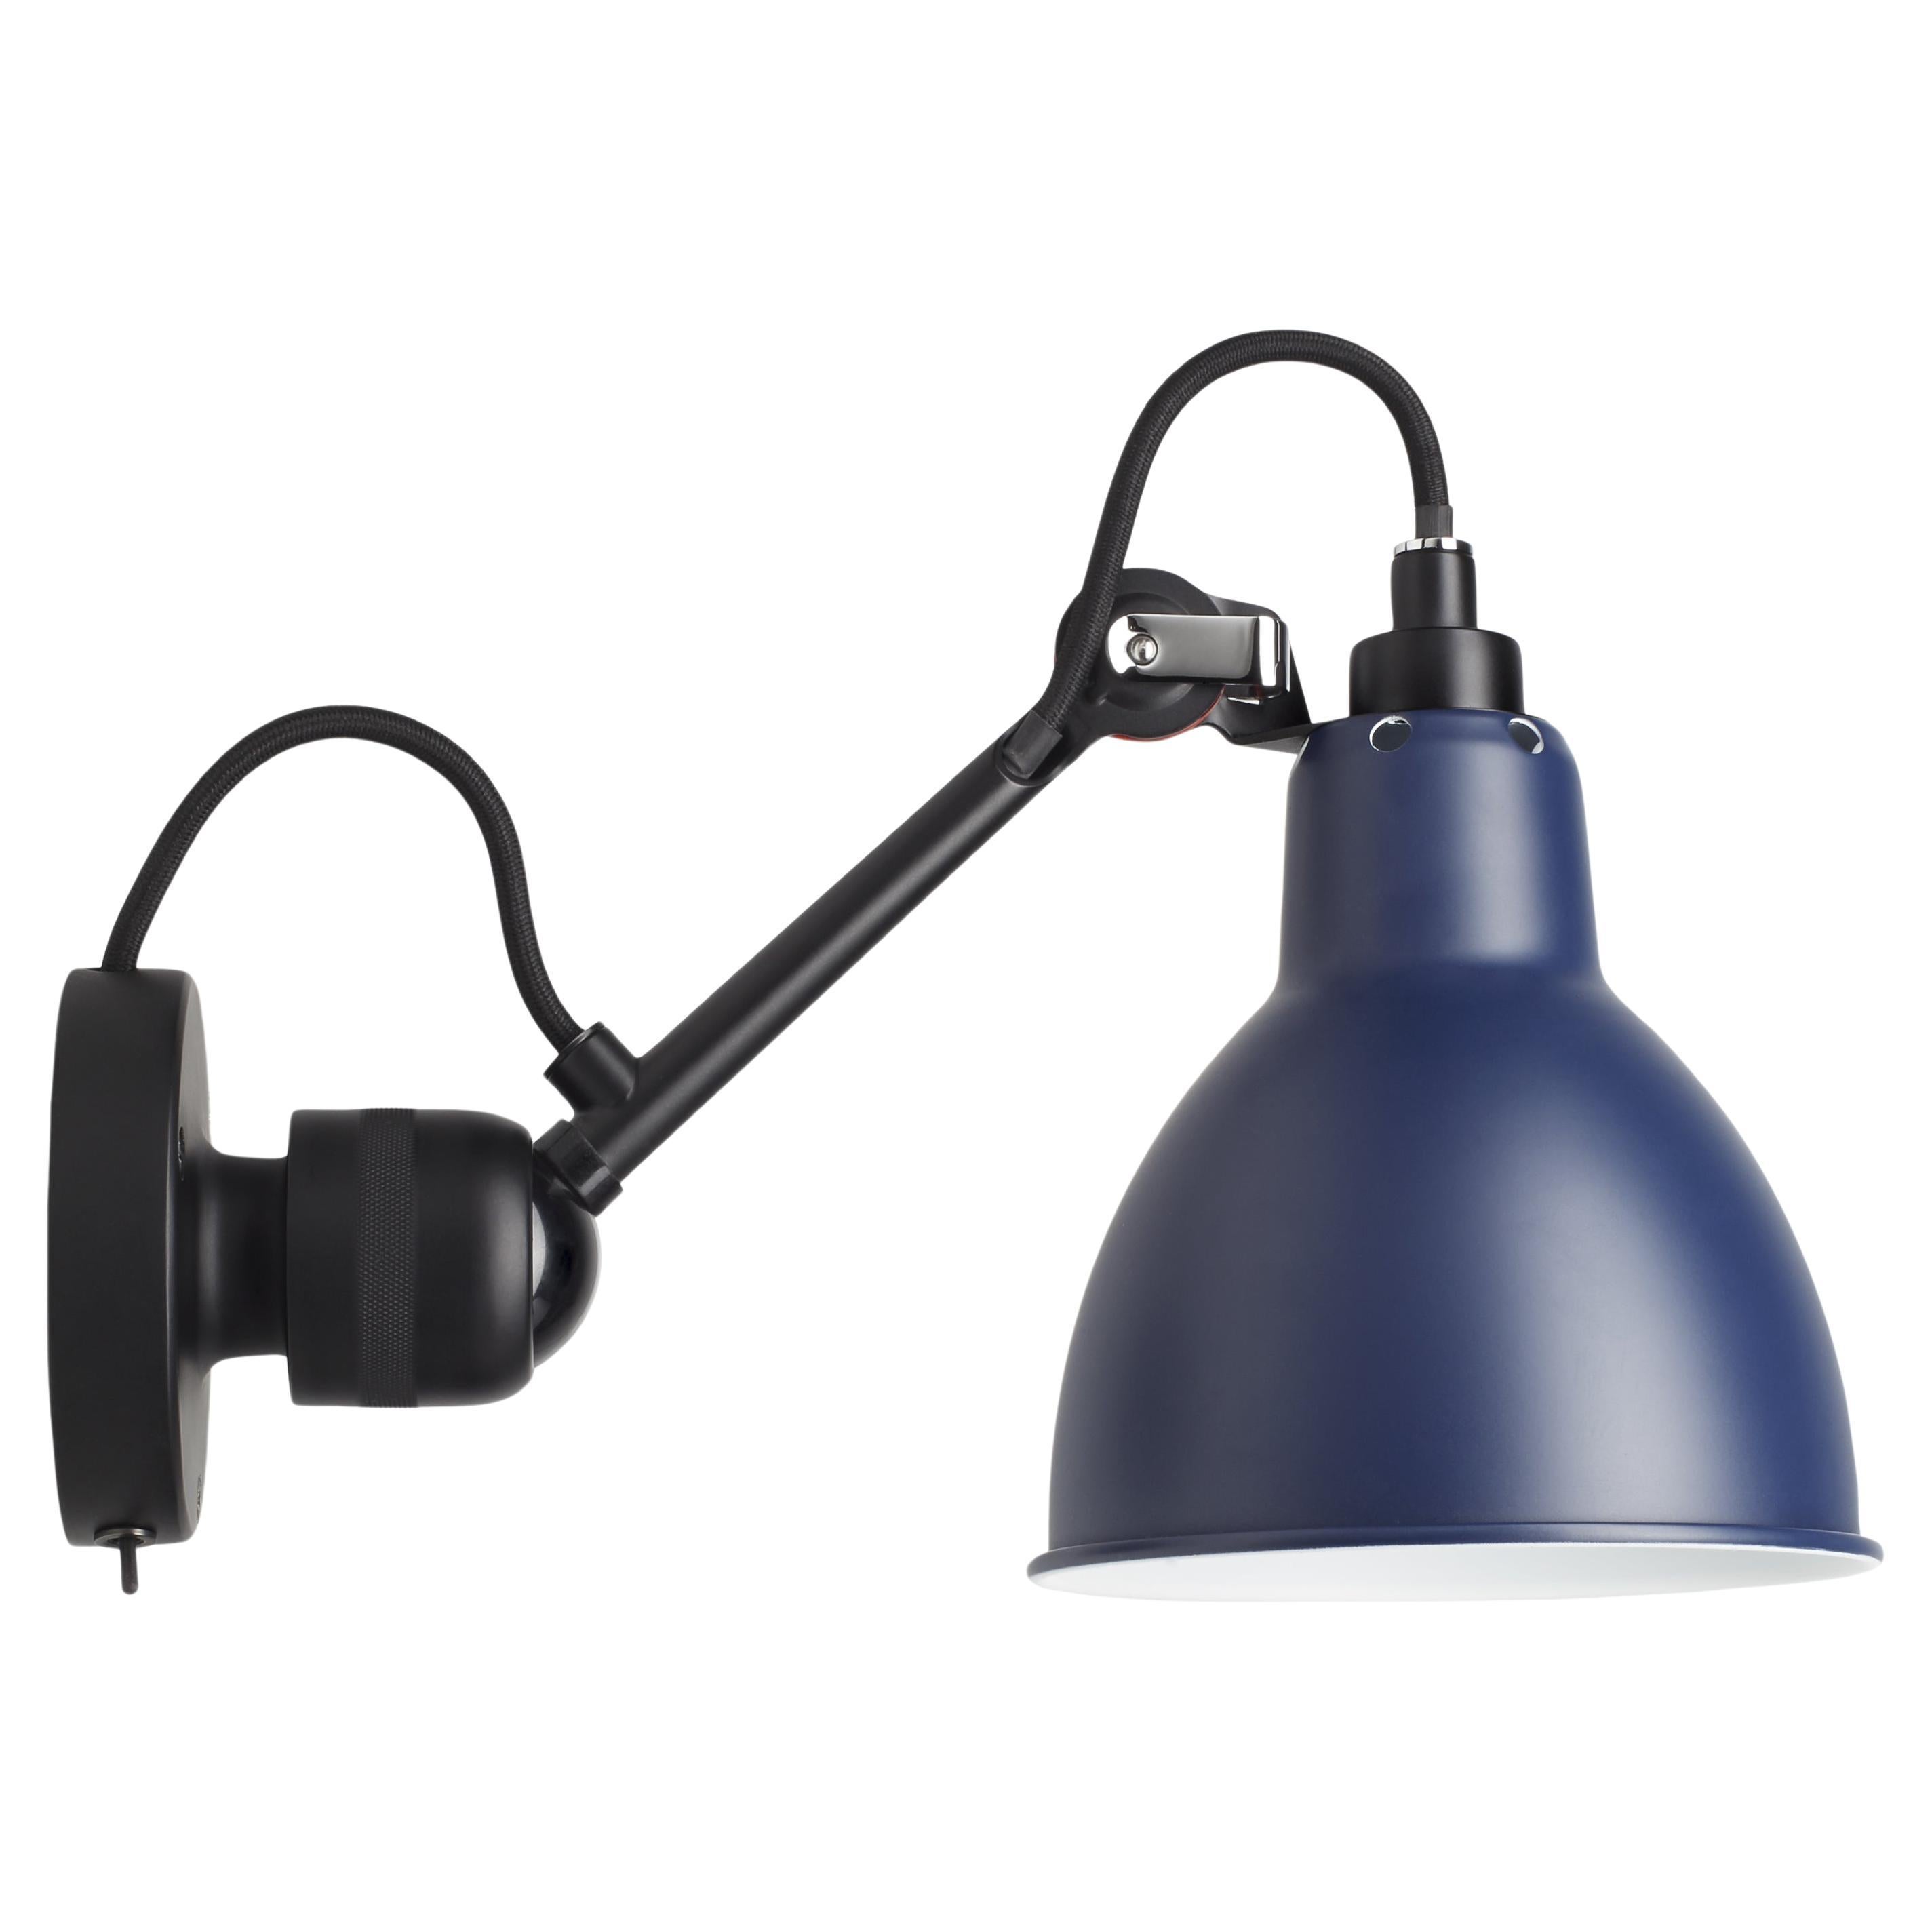 DCW Editions La Lampe Gras N°304 SW Wall Lamp in Black Arm and Blue Shade